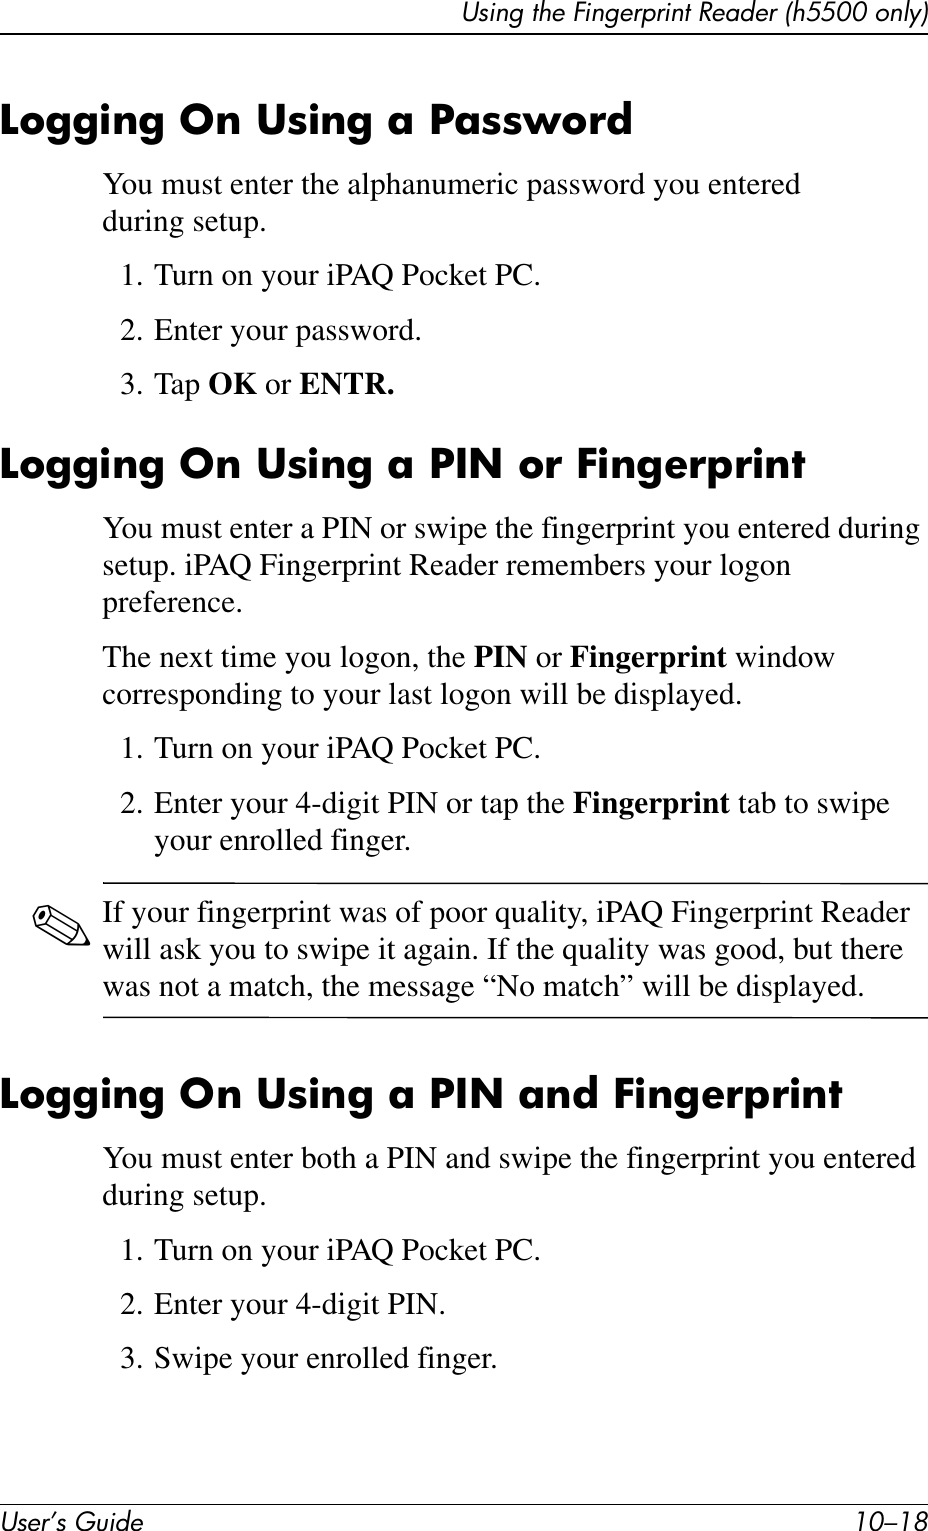 User’s Guide 10–18Using the Fingerprint Reader (h5500 only)Logging On Using a PasswordYou must enter the alphanumeric password you entered during setup.1. Turn on your iPAQ Pocket PC.2. Enter your password.3. Tap OK or ENTR.Logging On Using a PIN or FingerprintYou must enter a PIN or swipe the fingerprint you entered during setup. iPAQ Fingerprint Reader remembers your logon preference.The next time you logon, the PIN or Fingerprint window corresponding to your last logon will be displayed.1. Turn on your iPAQ Pocket PC.2. Enter your 4-digit PIN or tap the Fingerprint tab to swipe your enrolled finger.✎If your fingerprint was of poor quality, iPAQ Fingerprint Reader will ask you to swipe it again. If the quality was good, but there was not a match, the message “No match” will be displayed.Logging On Using a PIN and FingerprintYou must enter both a PIN and swipe the fingerprint you entered during setup.1. Turn on your iPAQ Pocket PC.2. Enter your 4-digit PIN.3. Swipe your enrolled finger.